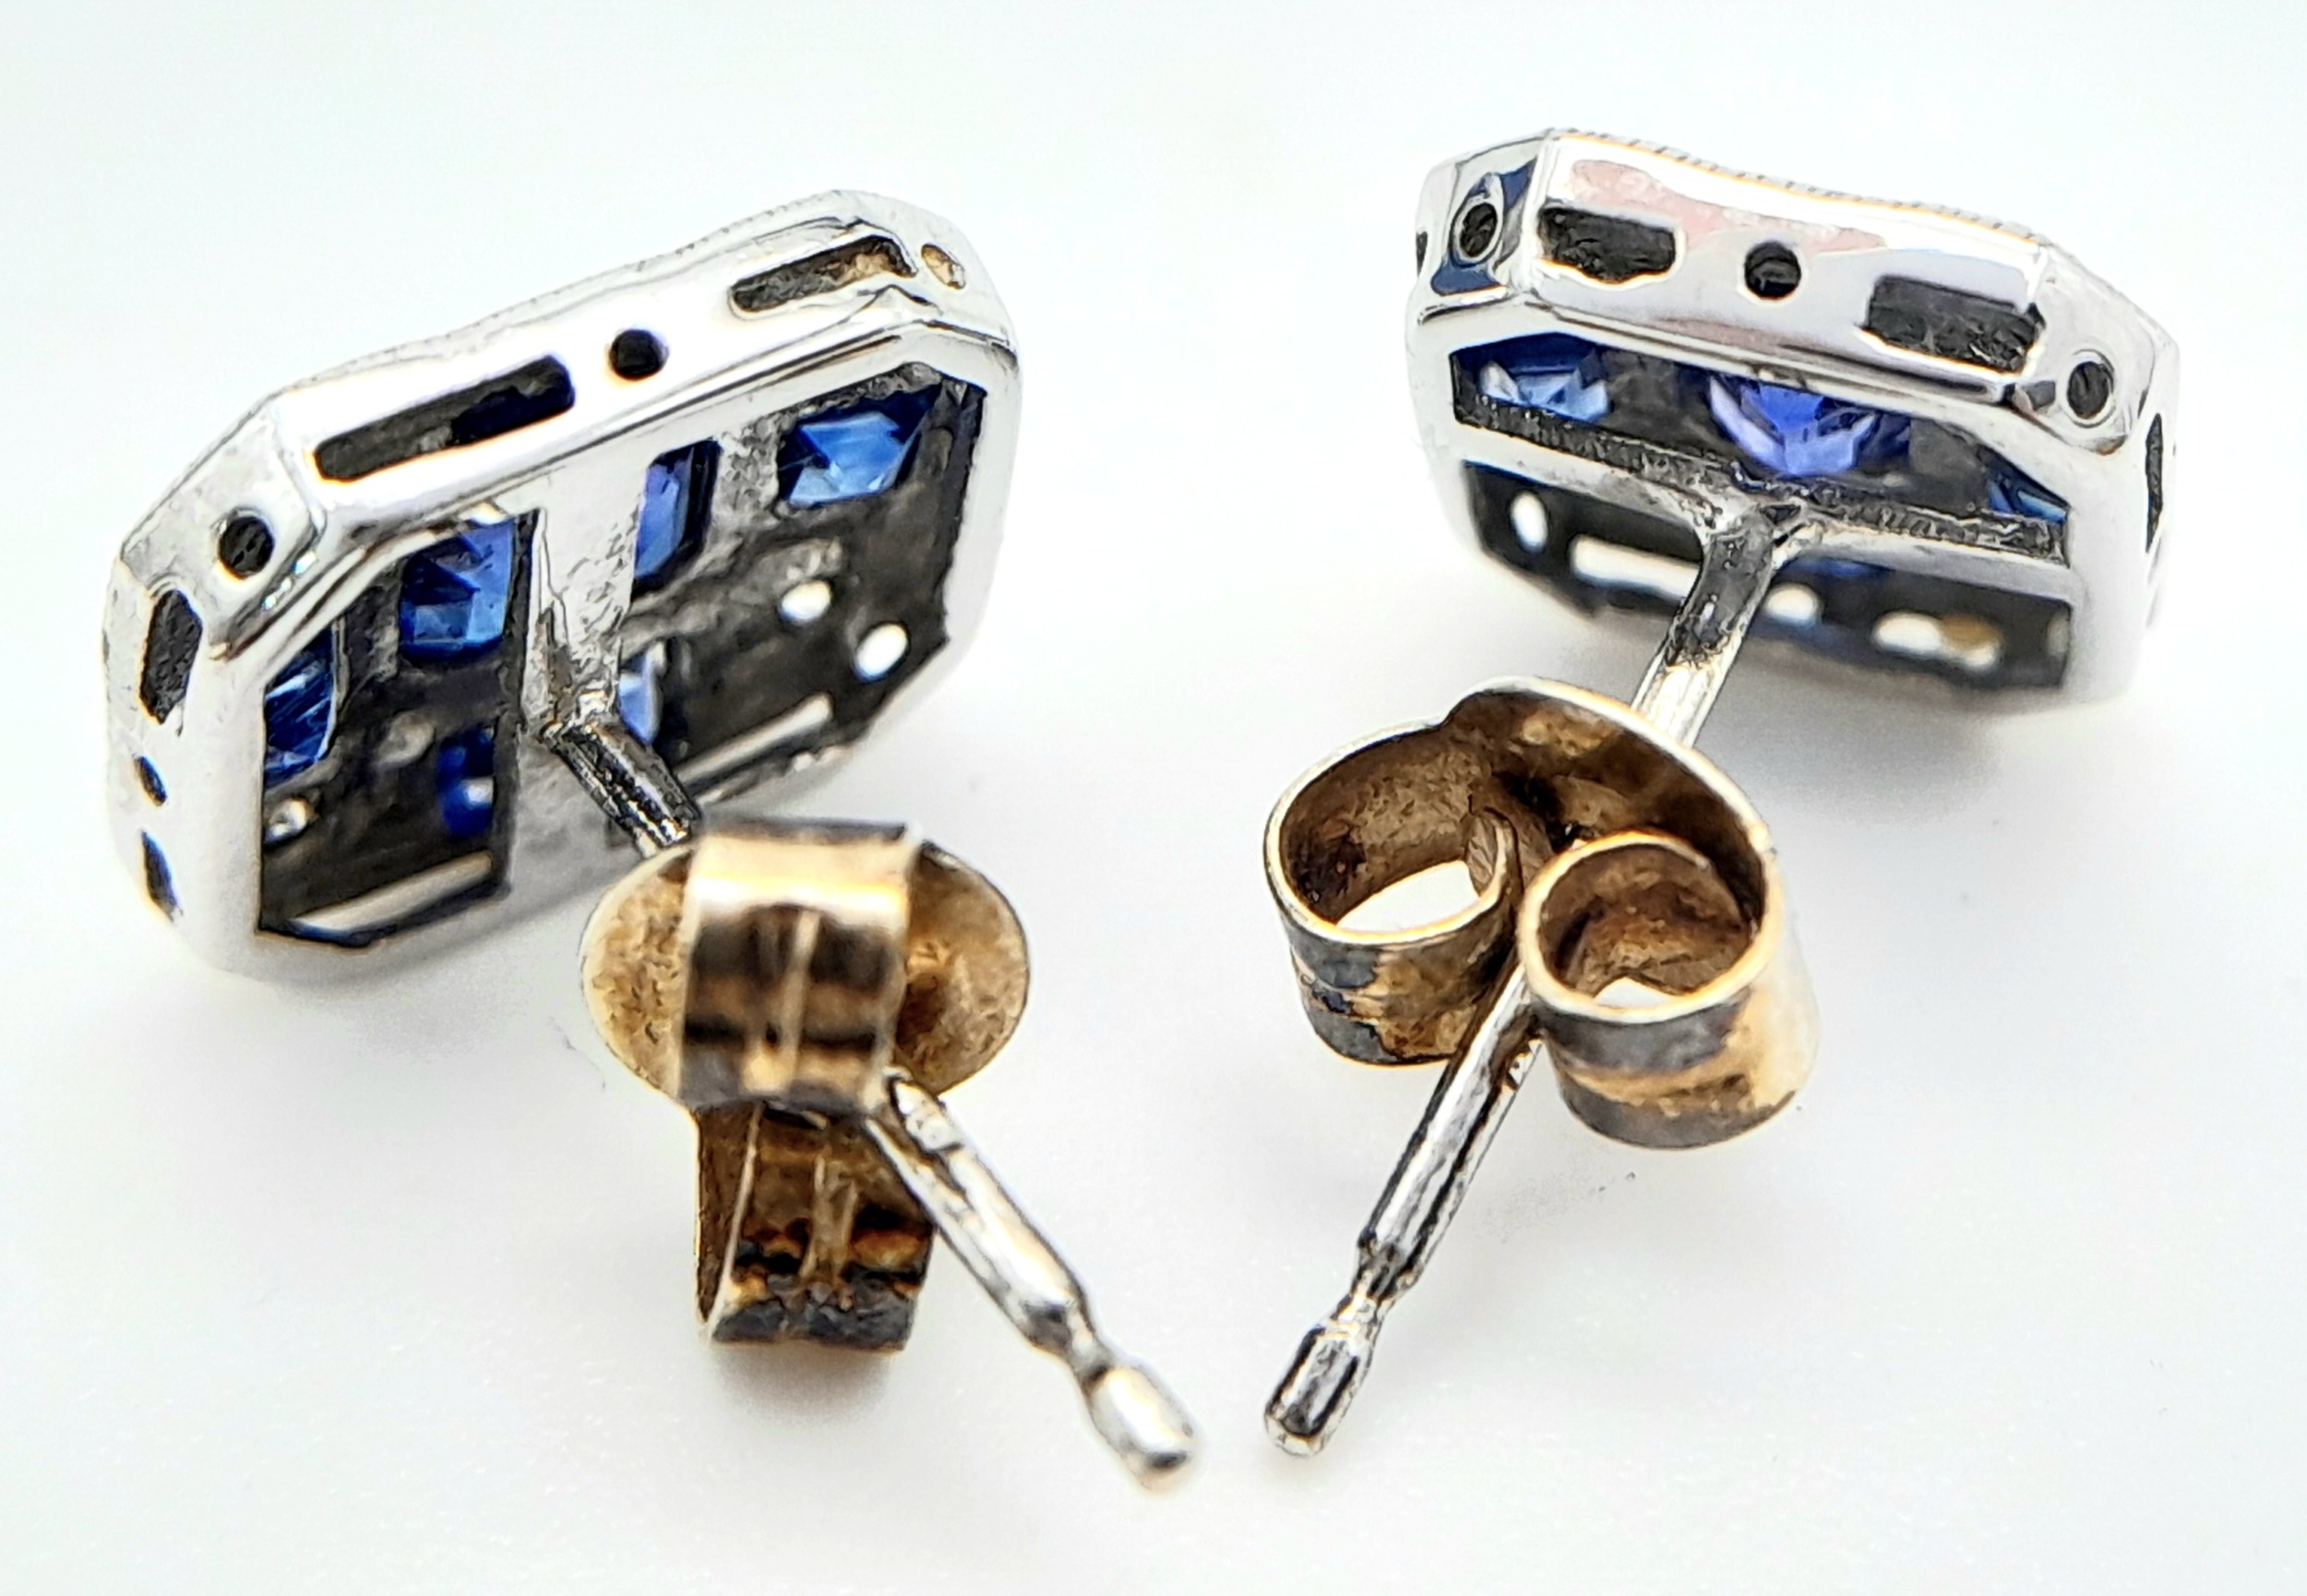 An Exquisite Pair of Vintage 9K White Gold, Diamond and Sapphire Art Deco Design Stud Earrings. - Image 5 of 6